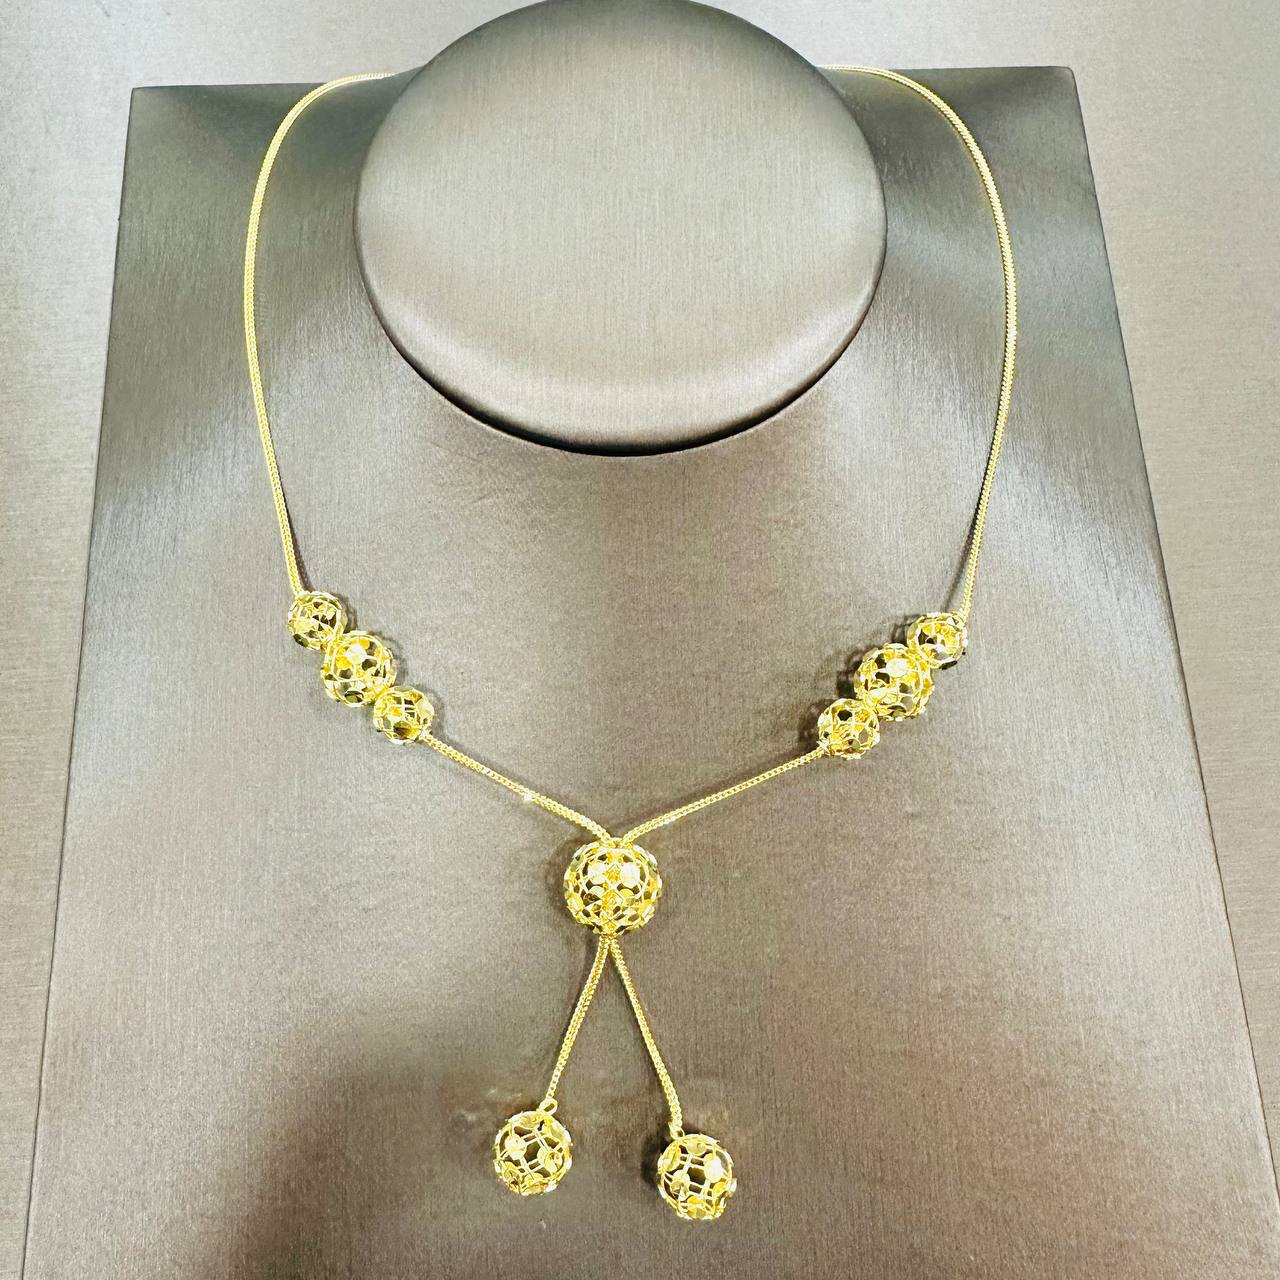 22k / 916 Gold Ball Necklace with Ball Pendant-Necklaces-Best Gold Shop